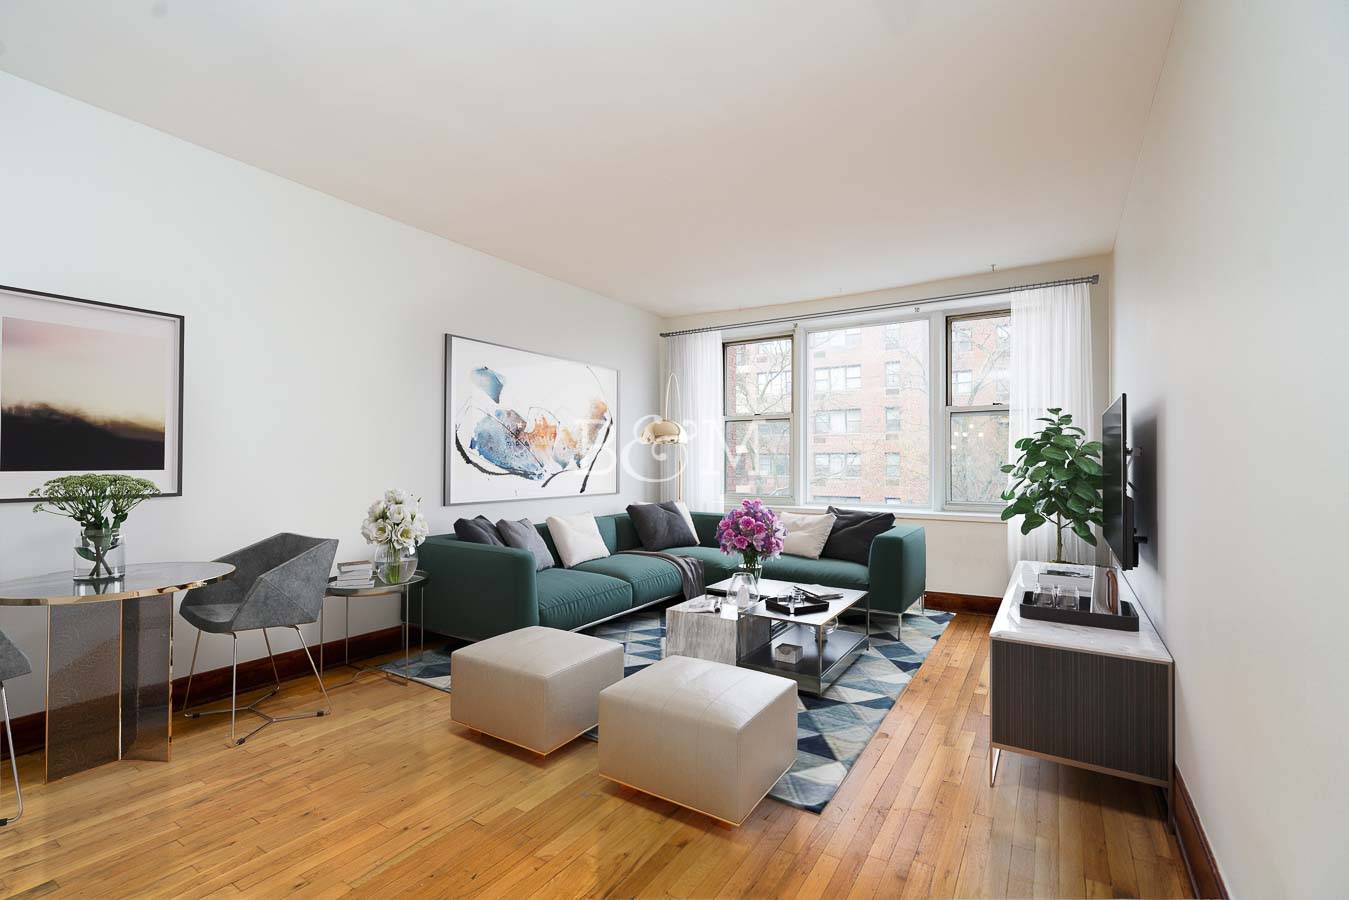 Welcome to Kensington, Brooklyn's best kept secret, and your new home at 310 Beverley Road, where you are greeted with tree lined streets directly in front as well as the ...